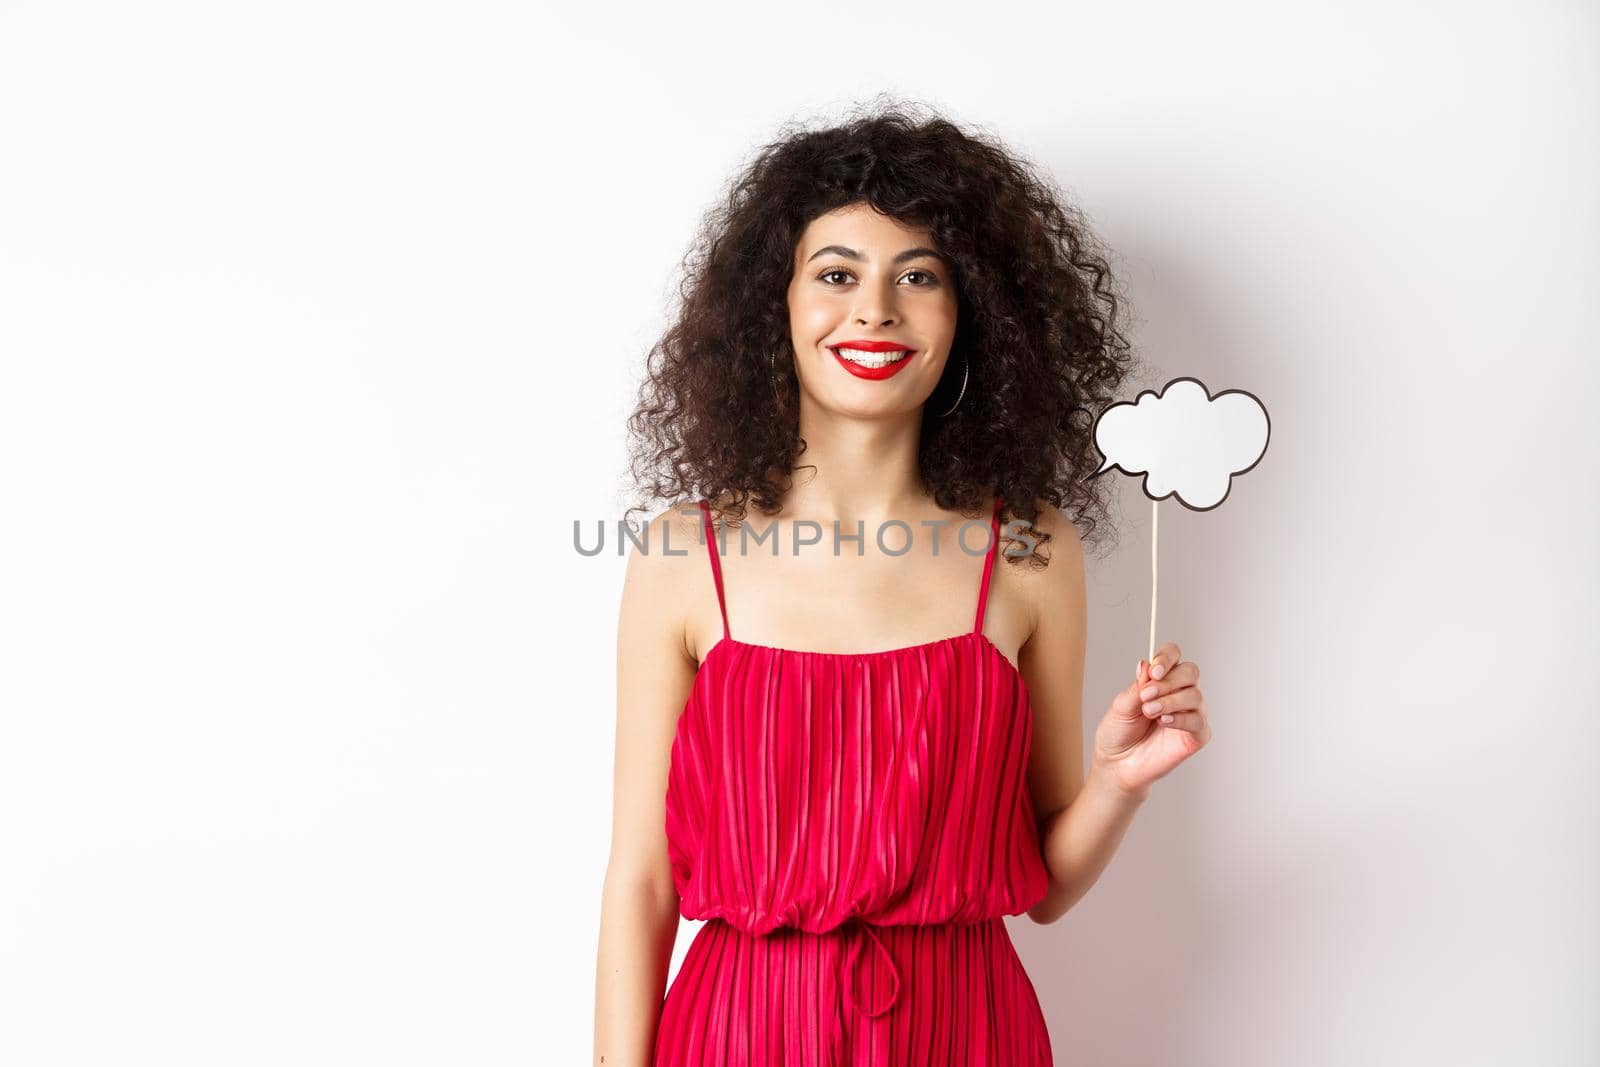 Happy stylish woman with curly hair, beauty makeup, holding comment cloud on stick and smiling, standing in red dress on white background.